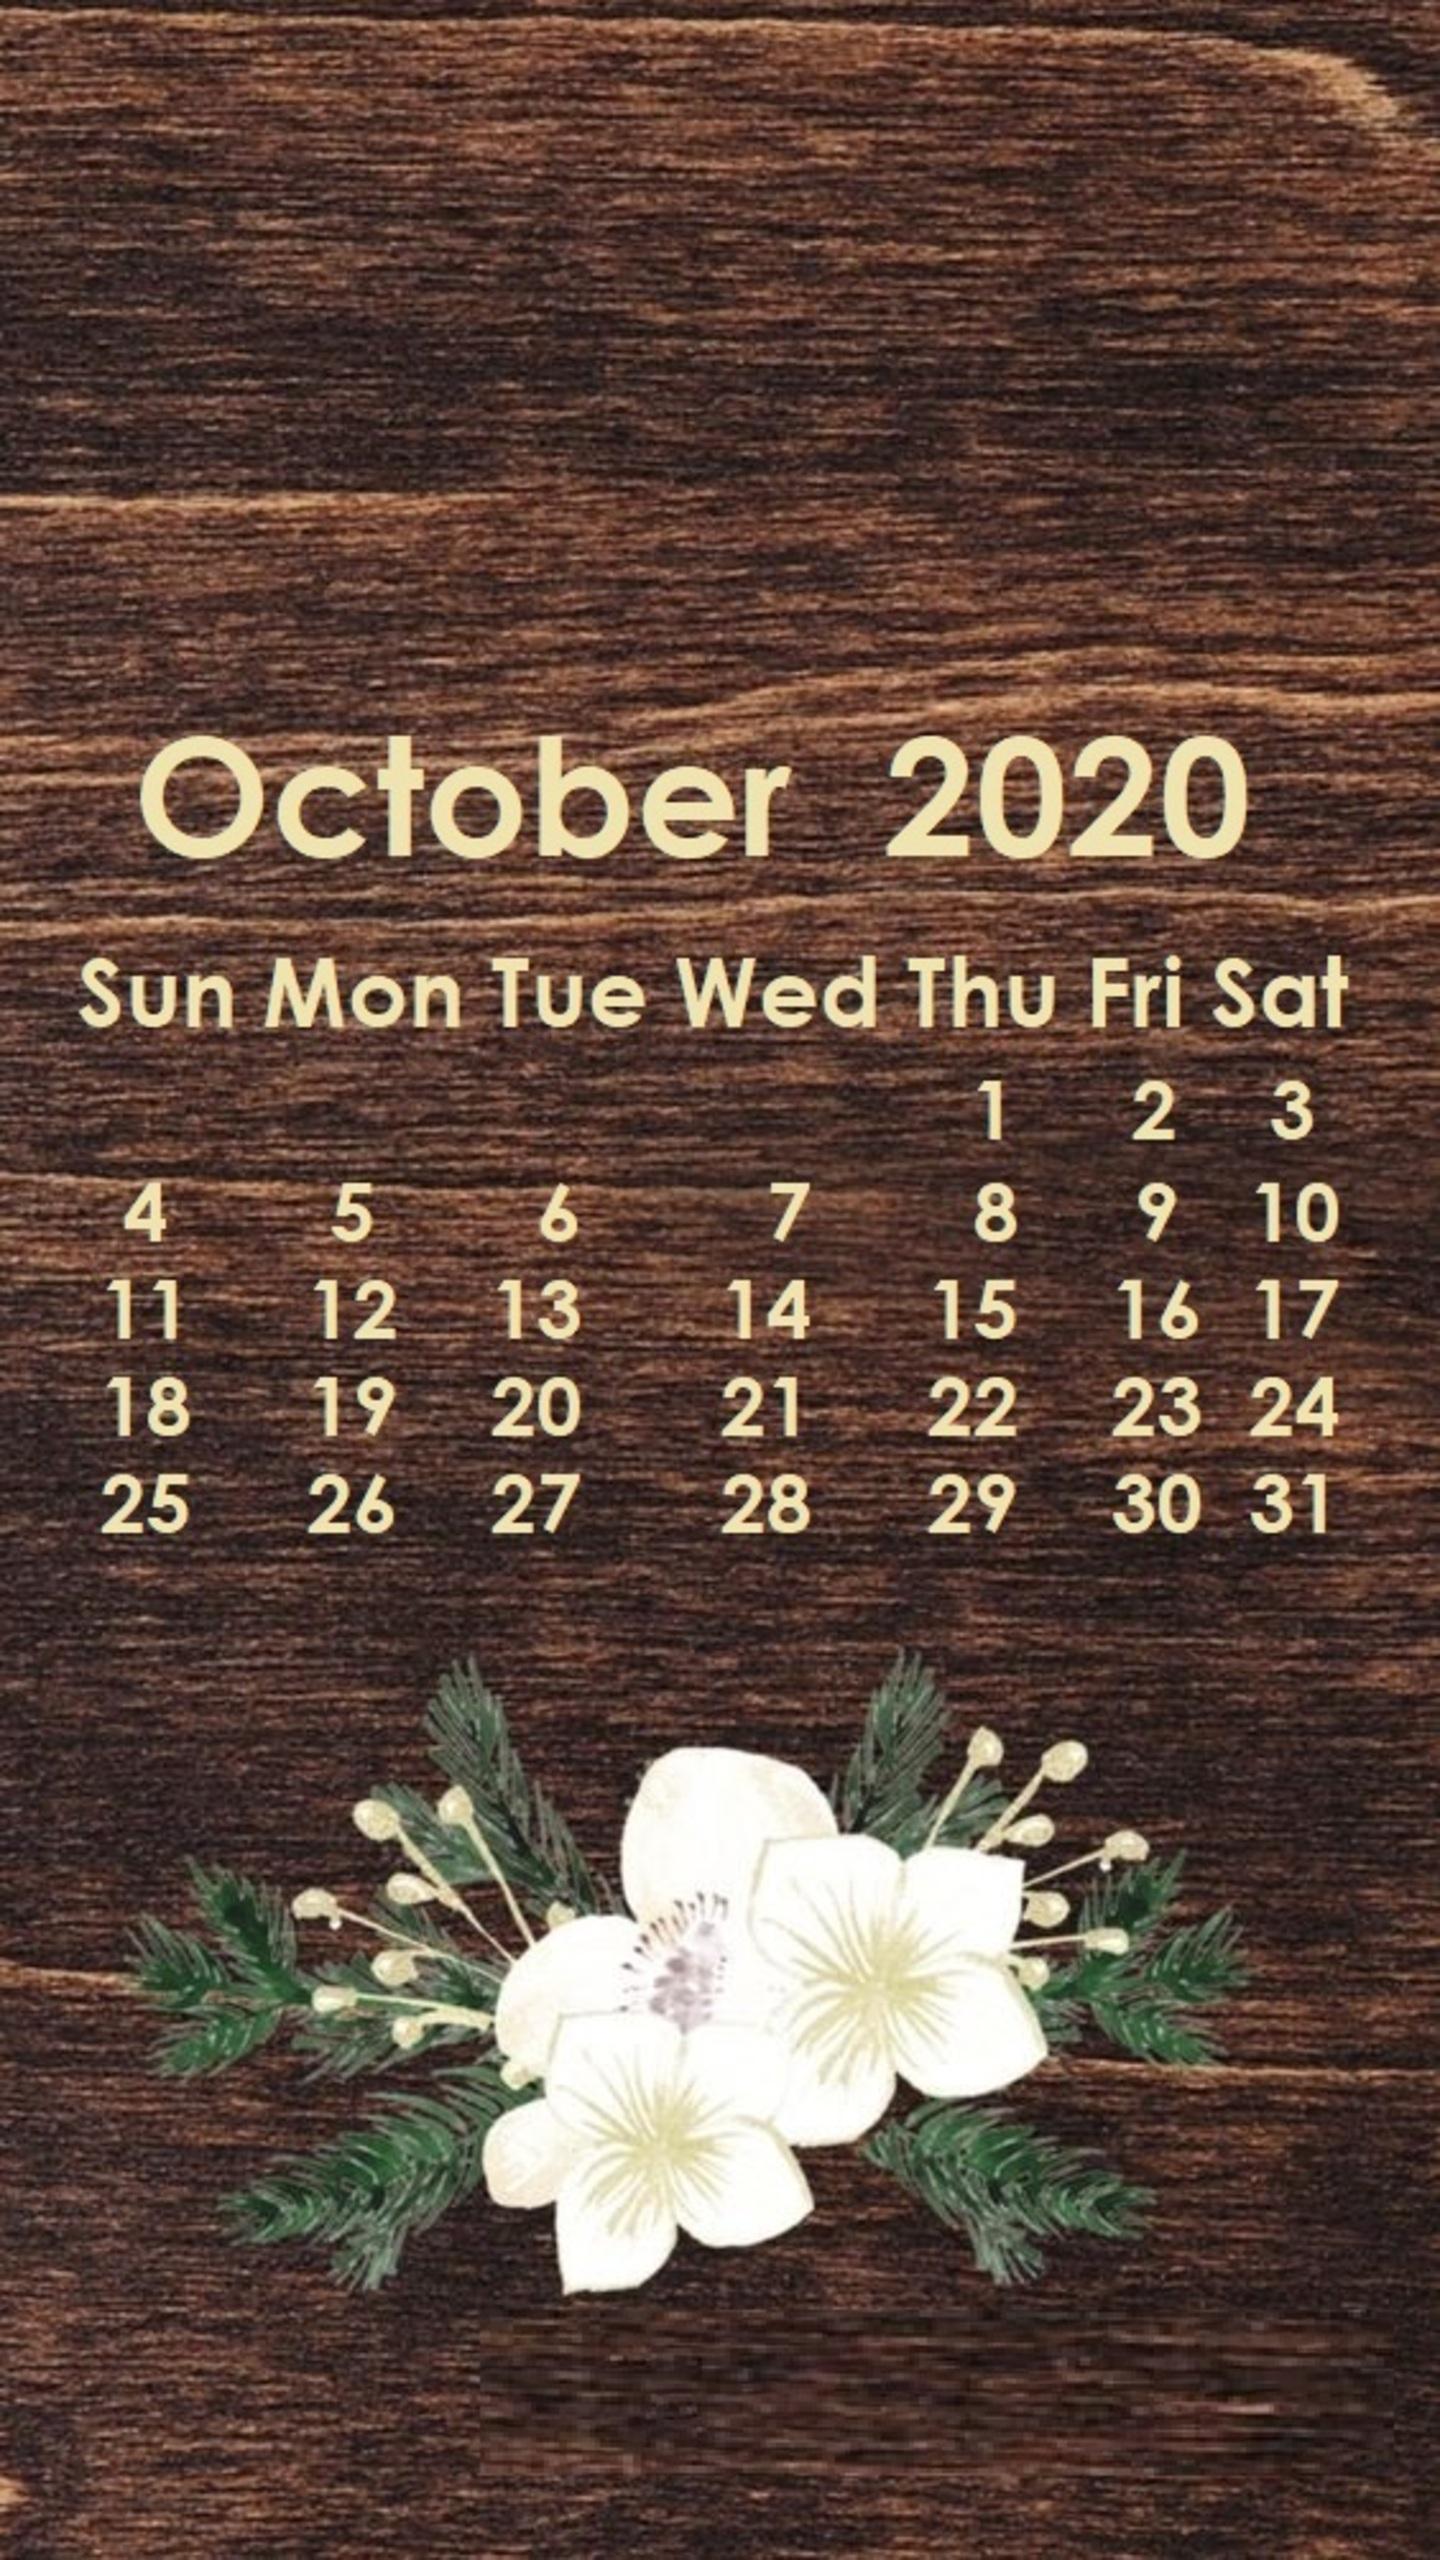 2020 Calendar Wallpapers for Android